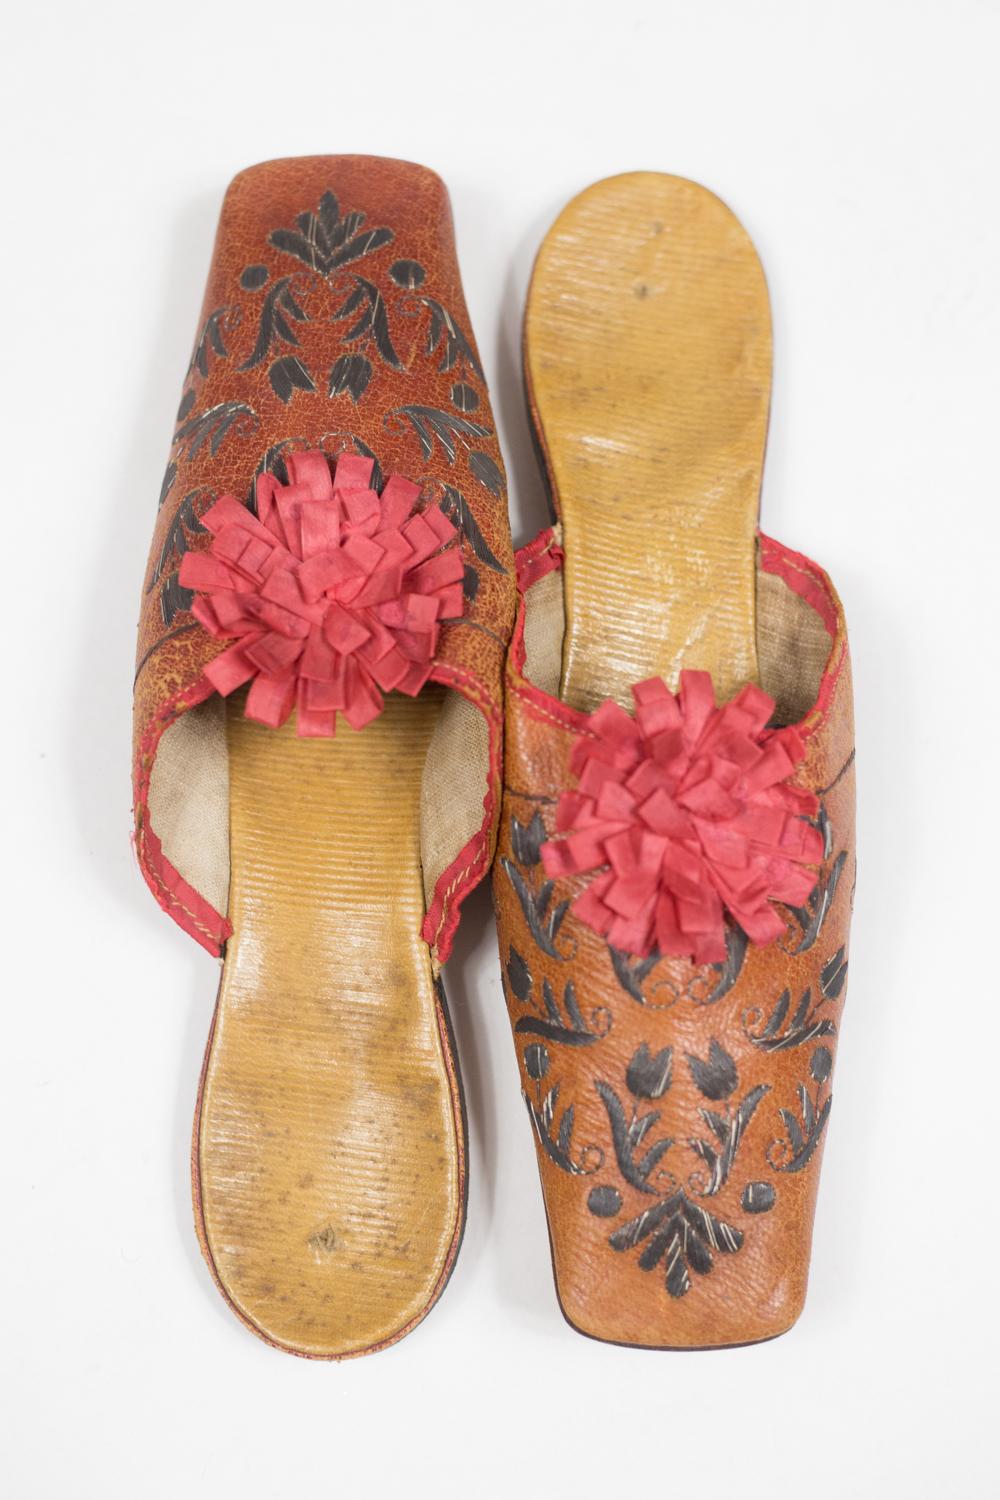 Pair Of Leather Slippers Embroidered With Tulips - France Early 19c For Sale 4